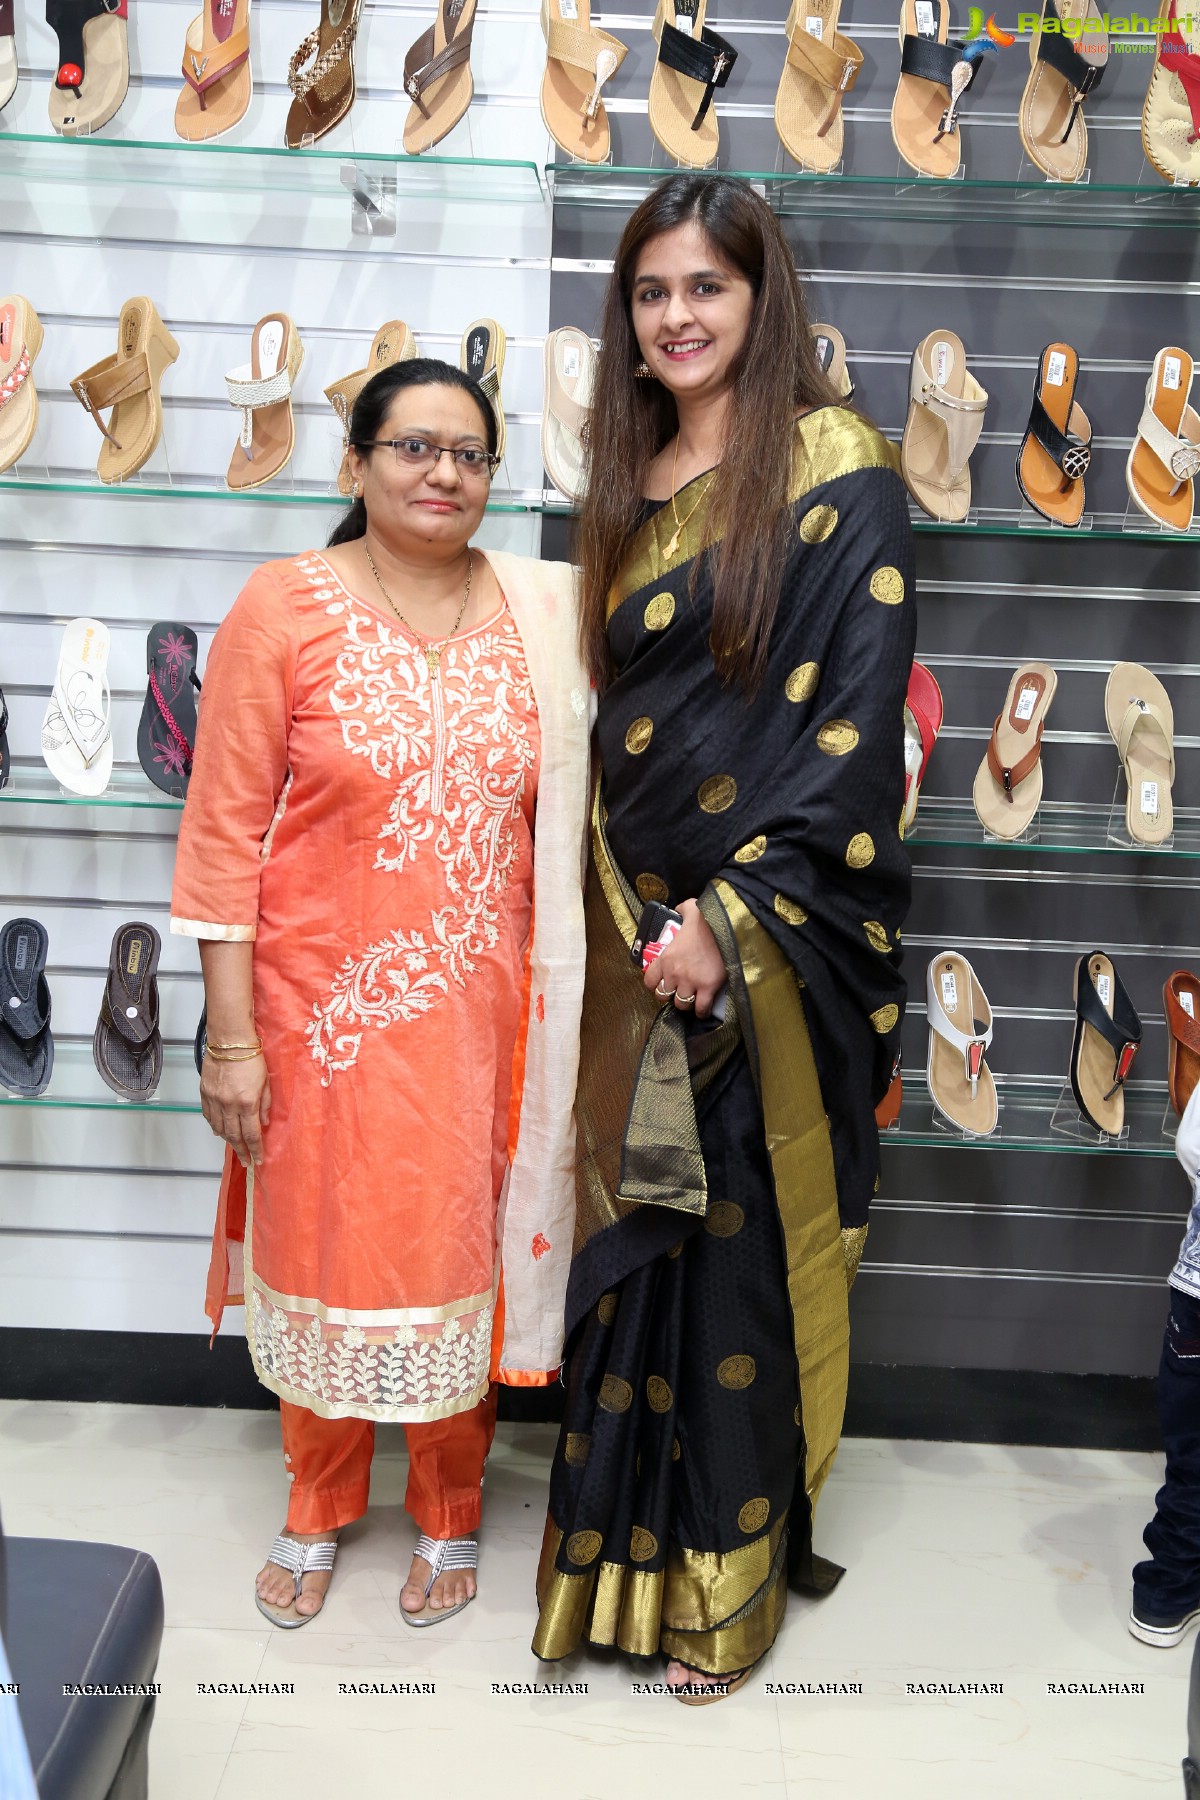 Grand Launch of Jetro Footwear at Friends Colony, Puppalaguda, Hyderabad